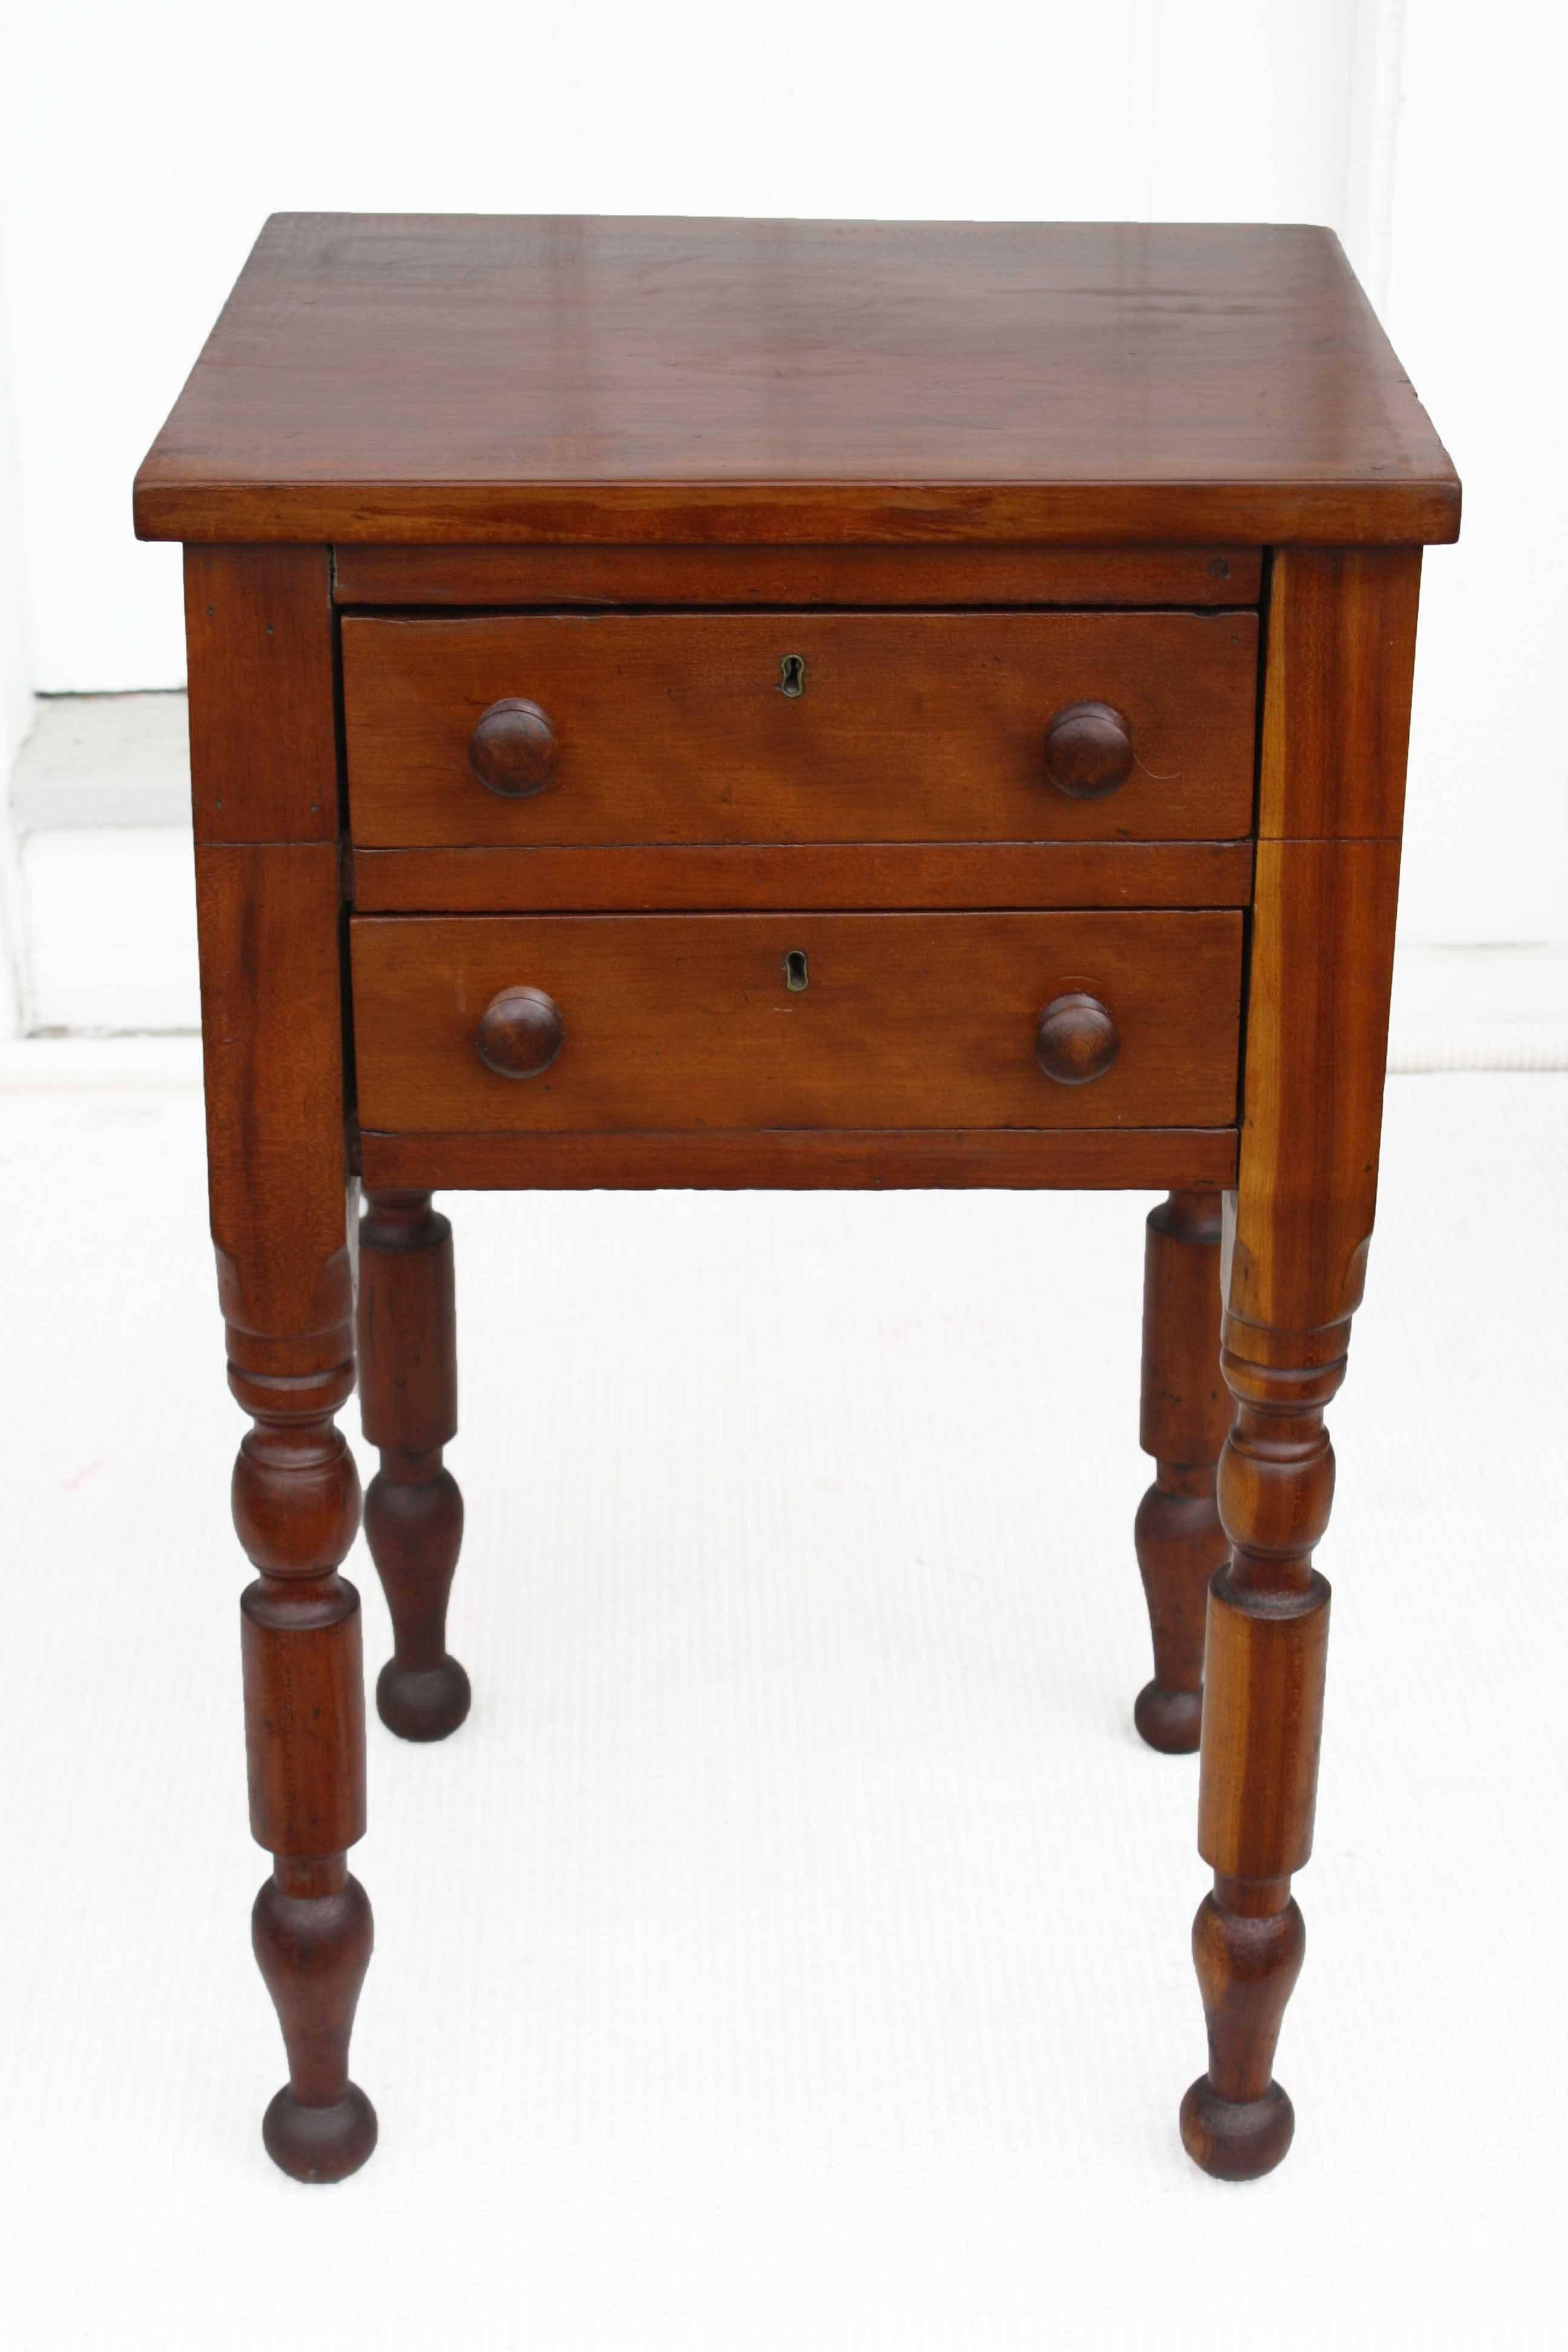 For bedside or chairside, a two drawer 'country Sheraton' table with complex baluster turned legs. Frequently labelled a 